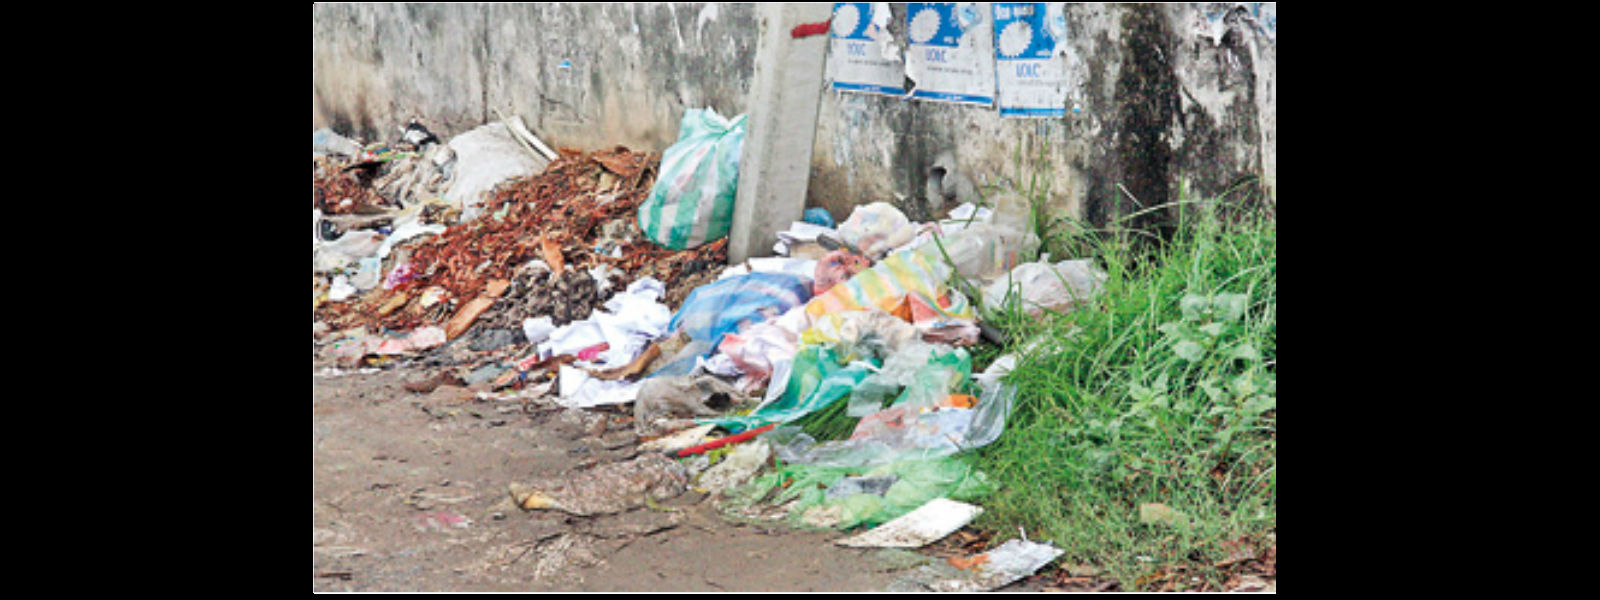 People who wrongly dispose garbage to be arrested